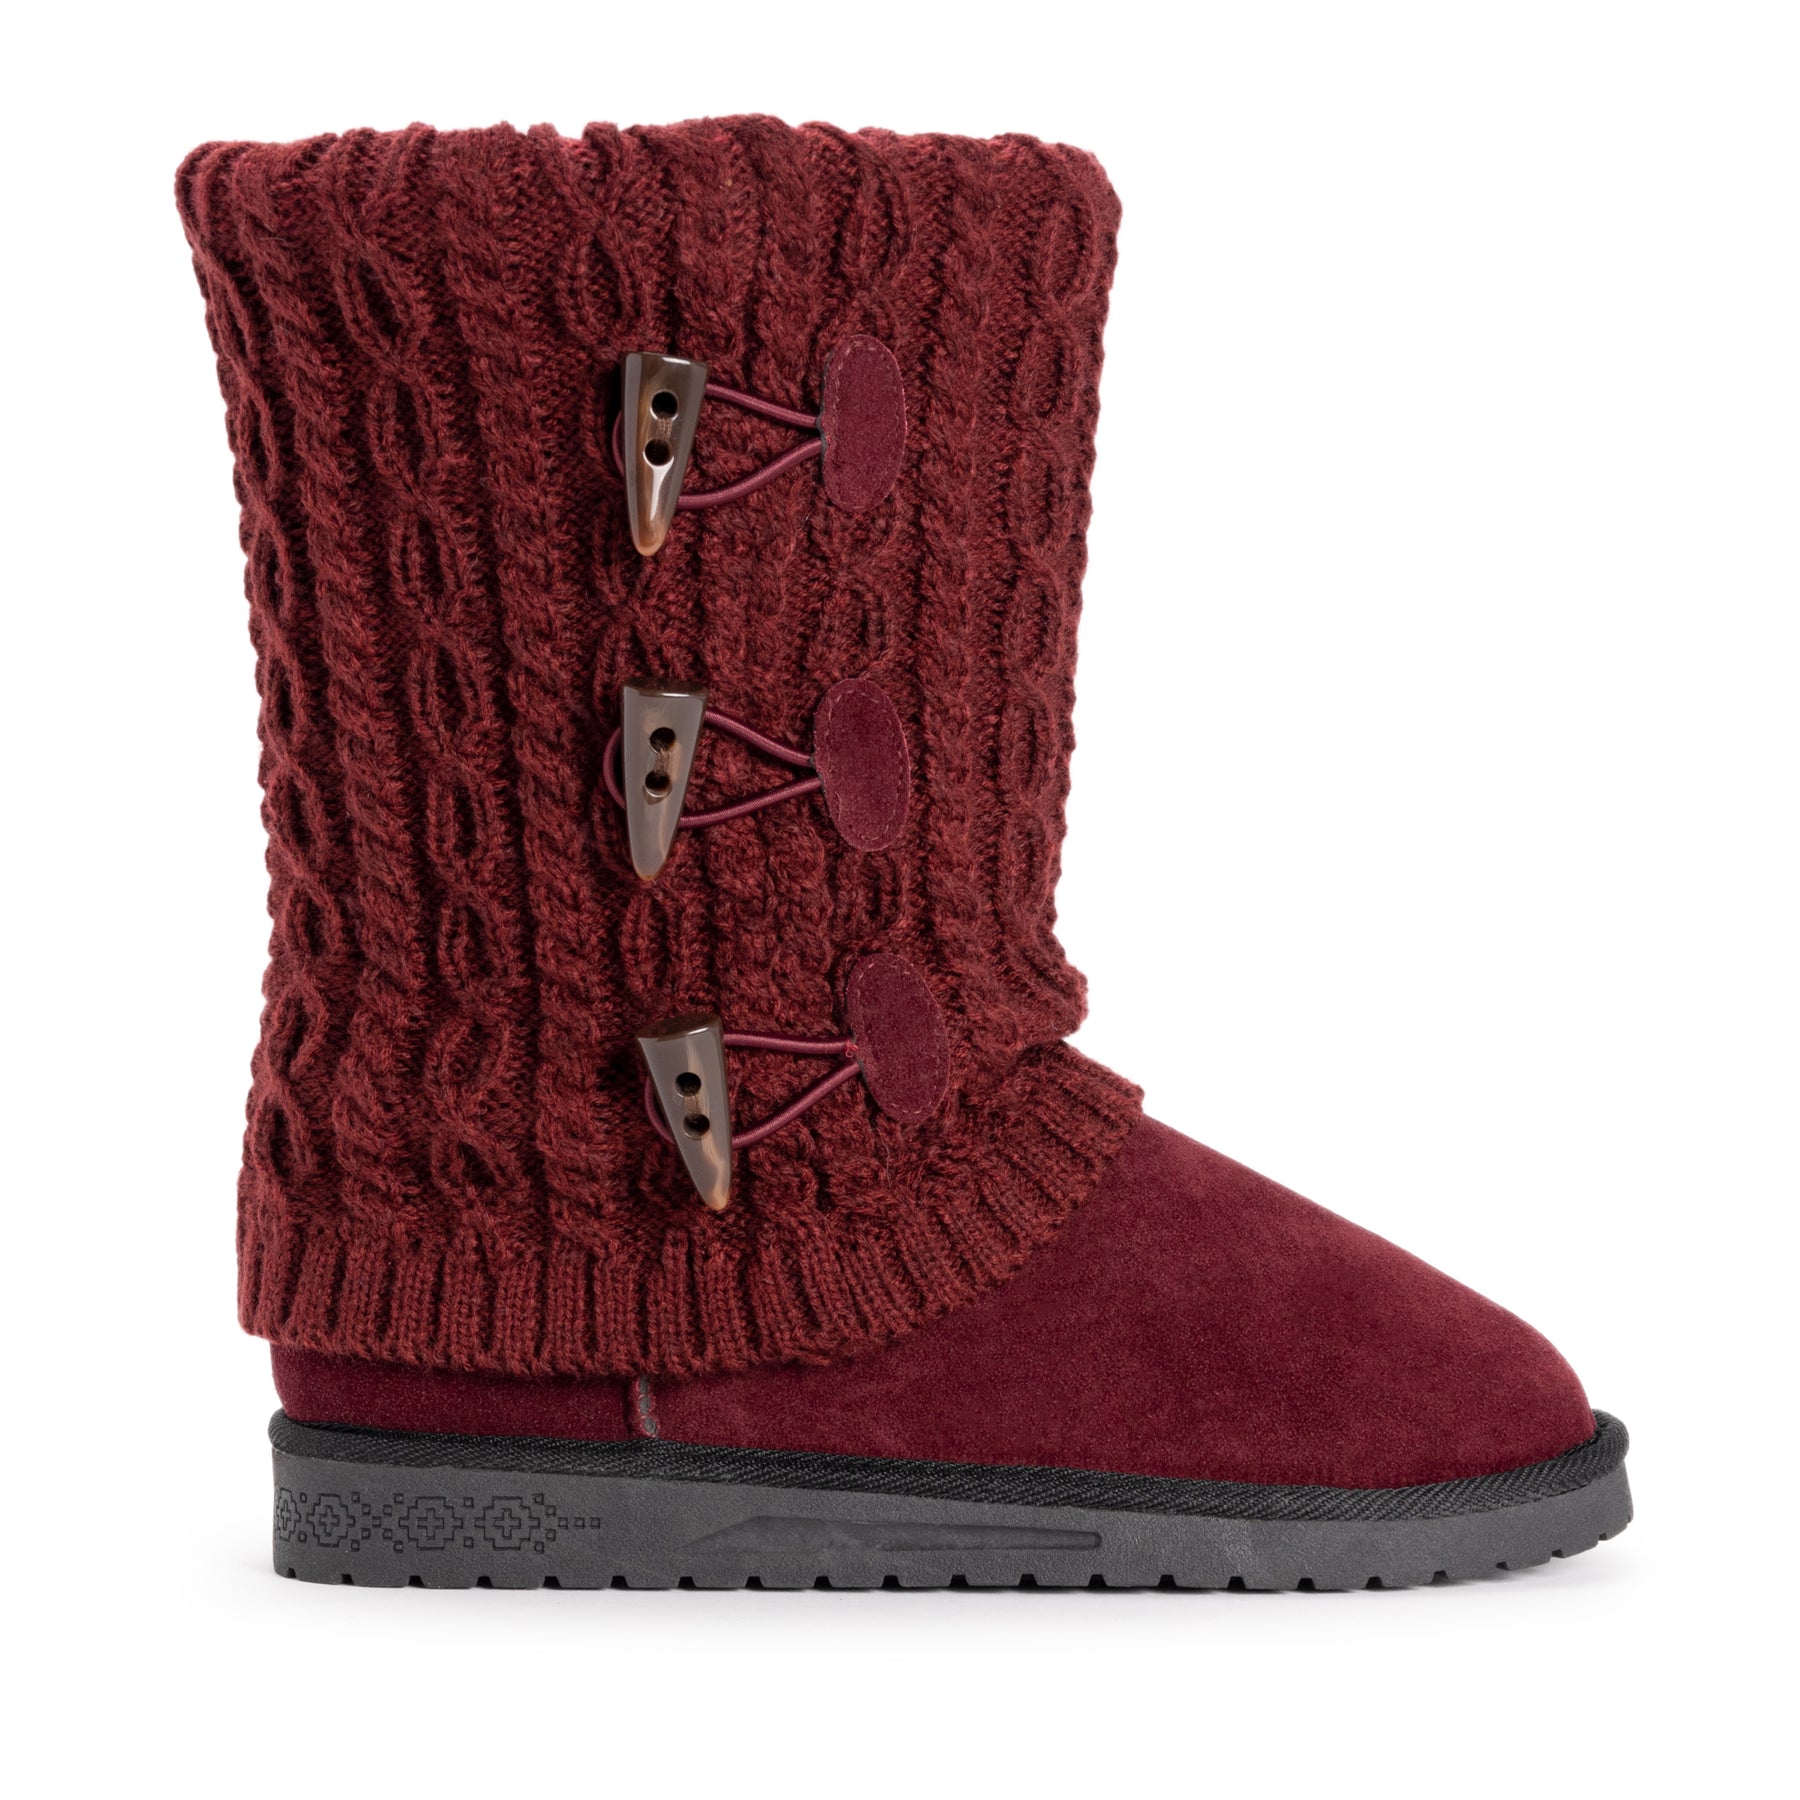 Women's Heidi Wool-Lined Leather Boots